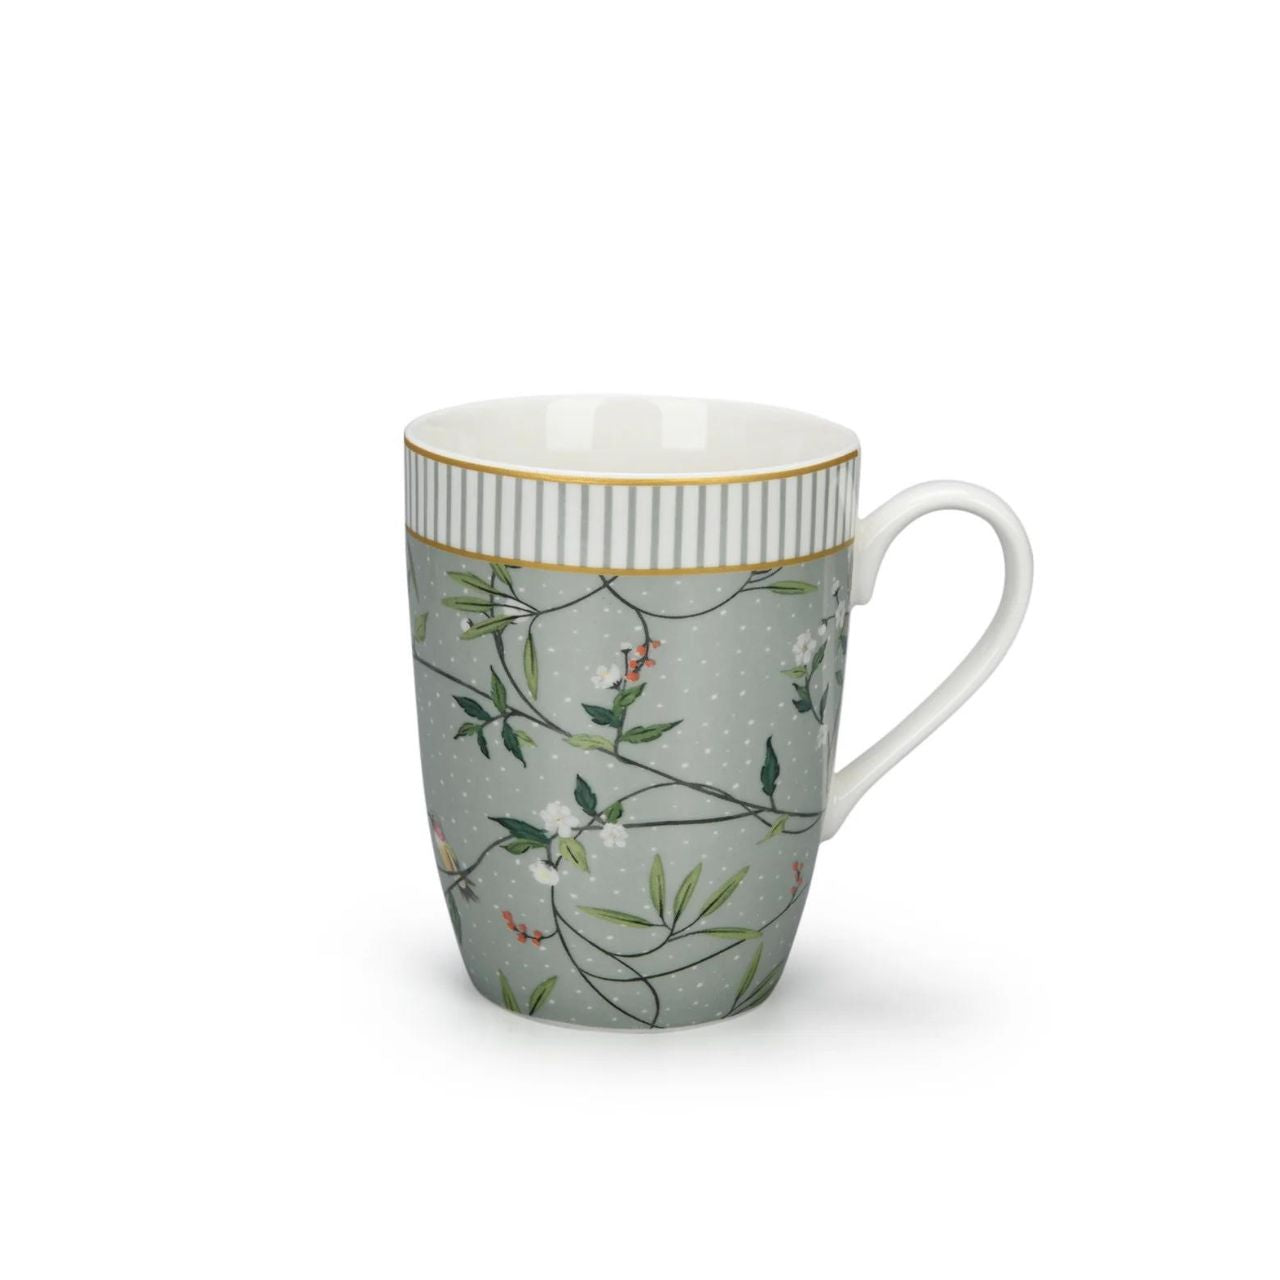 Alice Bell Collection Set of 6 Mugs by Mindy Brownes  This Mindy Brownes Alice Bell Collection Set of 6 Mugs is perfect for any occasion. Crafted with high quality porcelain, these mugs feature unique green and intricate floral designs that are sure to bring some charm to your kitchen. Enjoy a hot beverage with your friends and family with this Alice Bell Collection set.